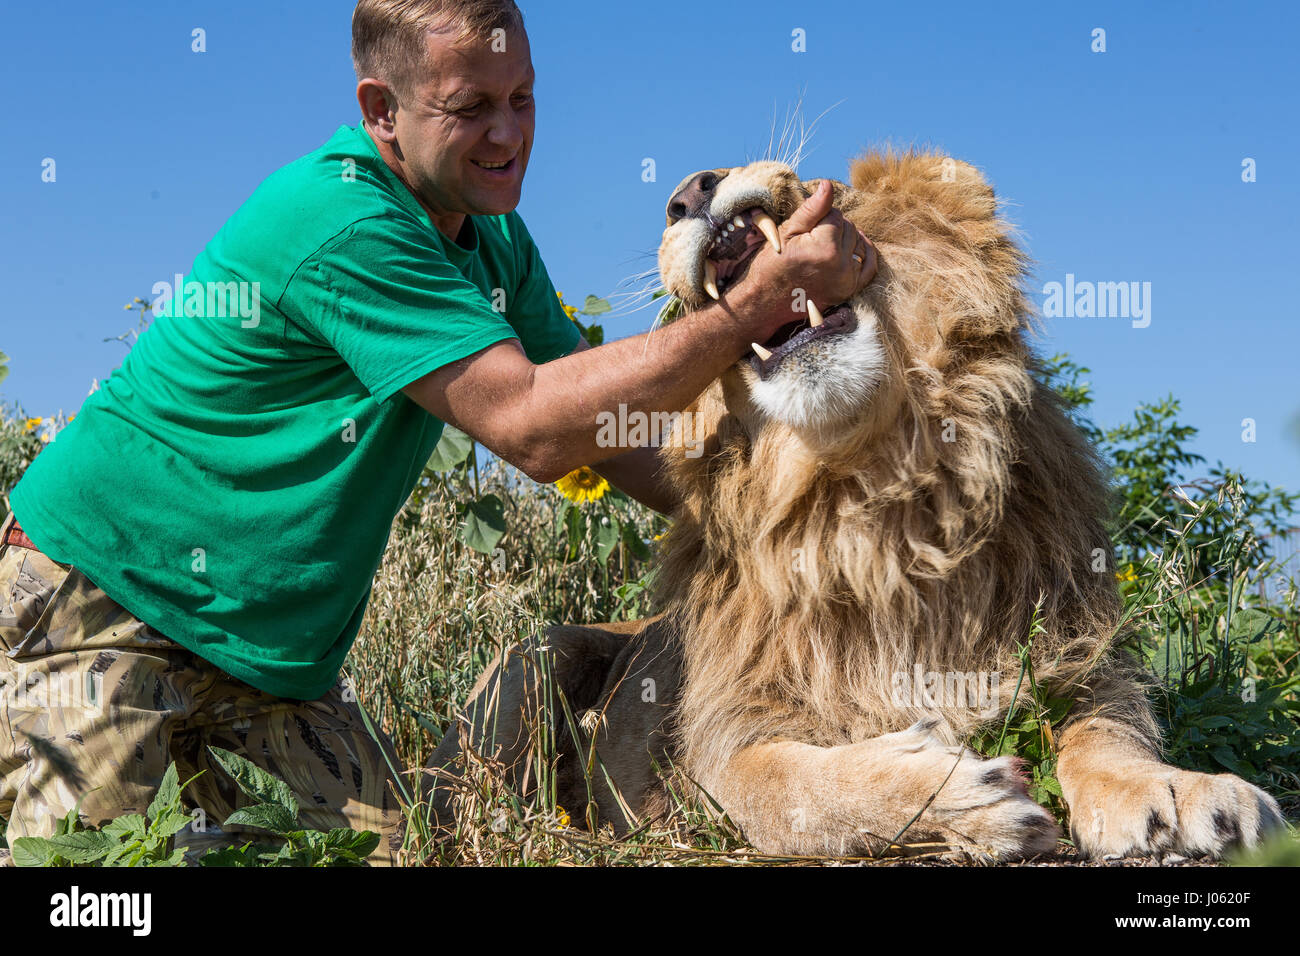 Oleg Zubkov with his arm in the lion's mouth. STUNNING images showing ferocious lions and fearless humans sitting on top of each other in a field have been captured by one surprised photographer. The surreal pictures show the 418-pound lions welcoming their human companions as they happily pose for selfies, kiss each other on the mouth and one white lion even reaches out a helping paw to a man swimming in a pond.  Other images show the lions affectionately greeting people from their cars and in one incredible image, a man bravely puts his arm in the beast’s mouth to pose for the camera. The sp Stock Photo